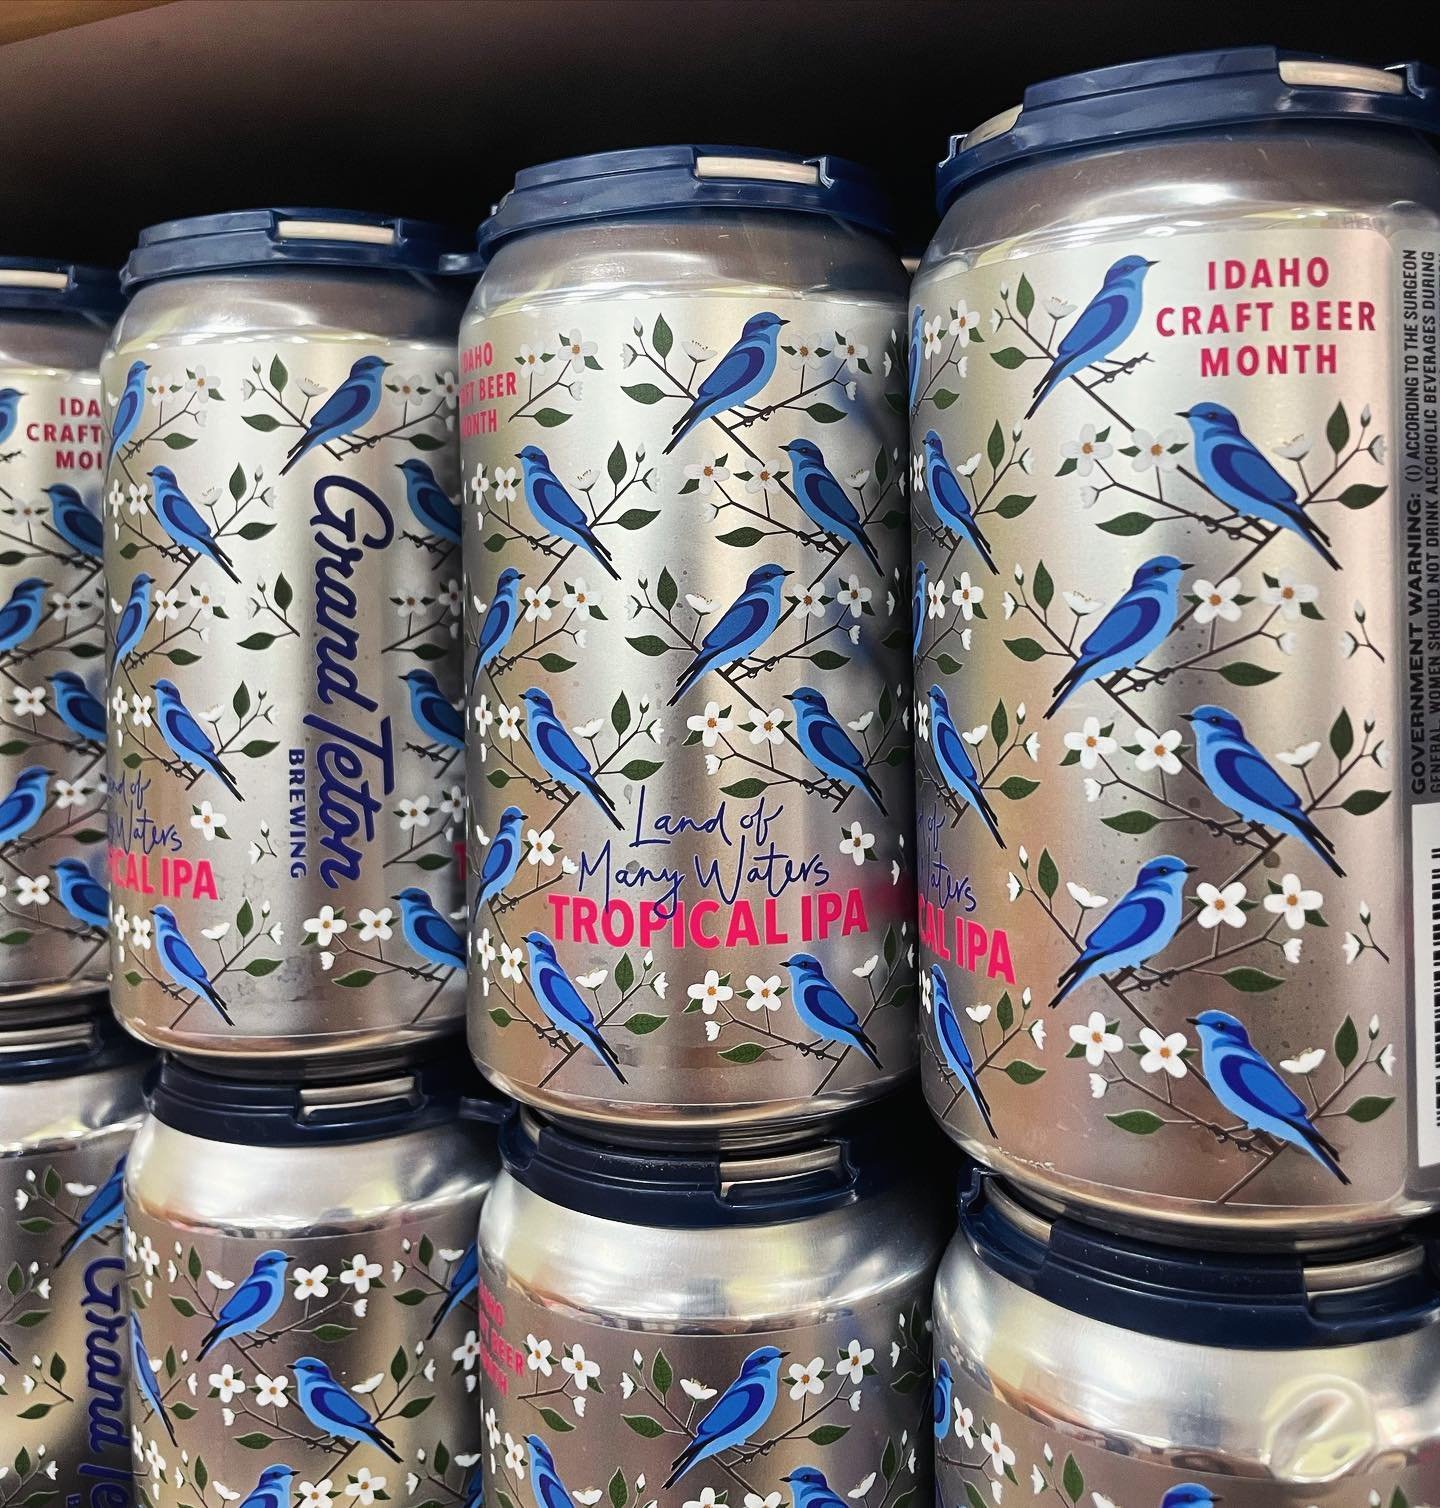 The Land of Many Waters Tropical IPA by @grandtetonbrewing got a little makeover and we LOVE it! A fantastic beer just for Idaho Craft Beer Month! #pintsupidaho #idahobeer